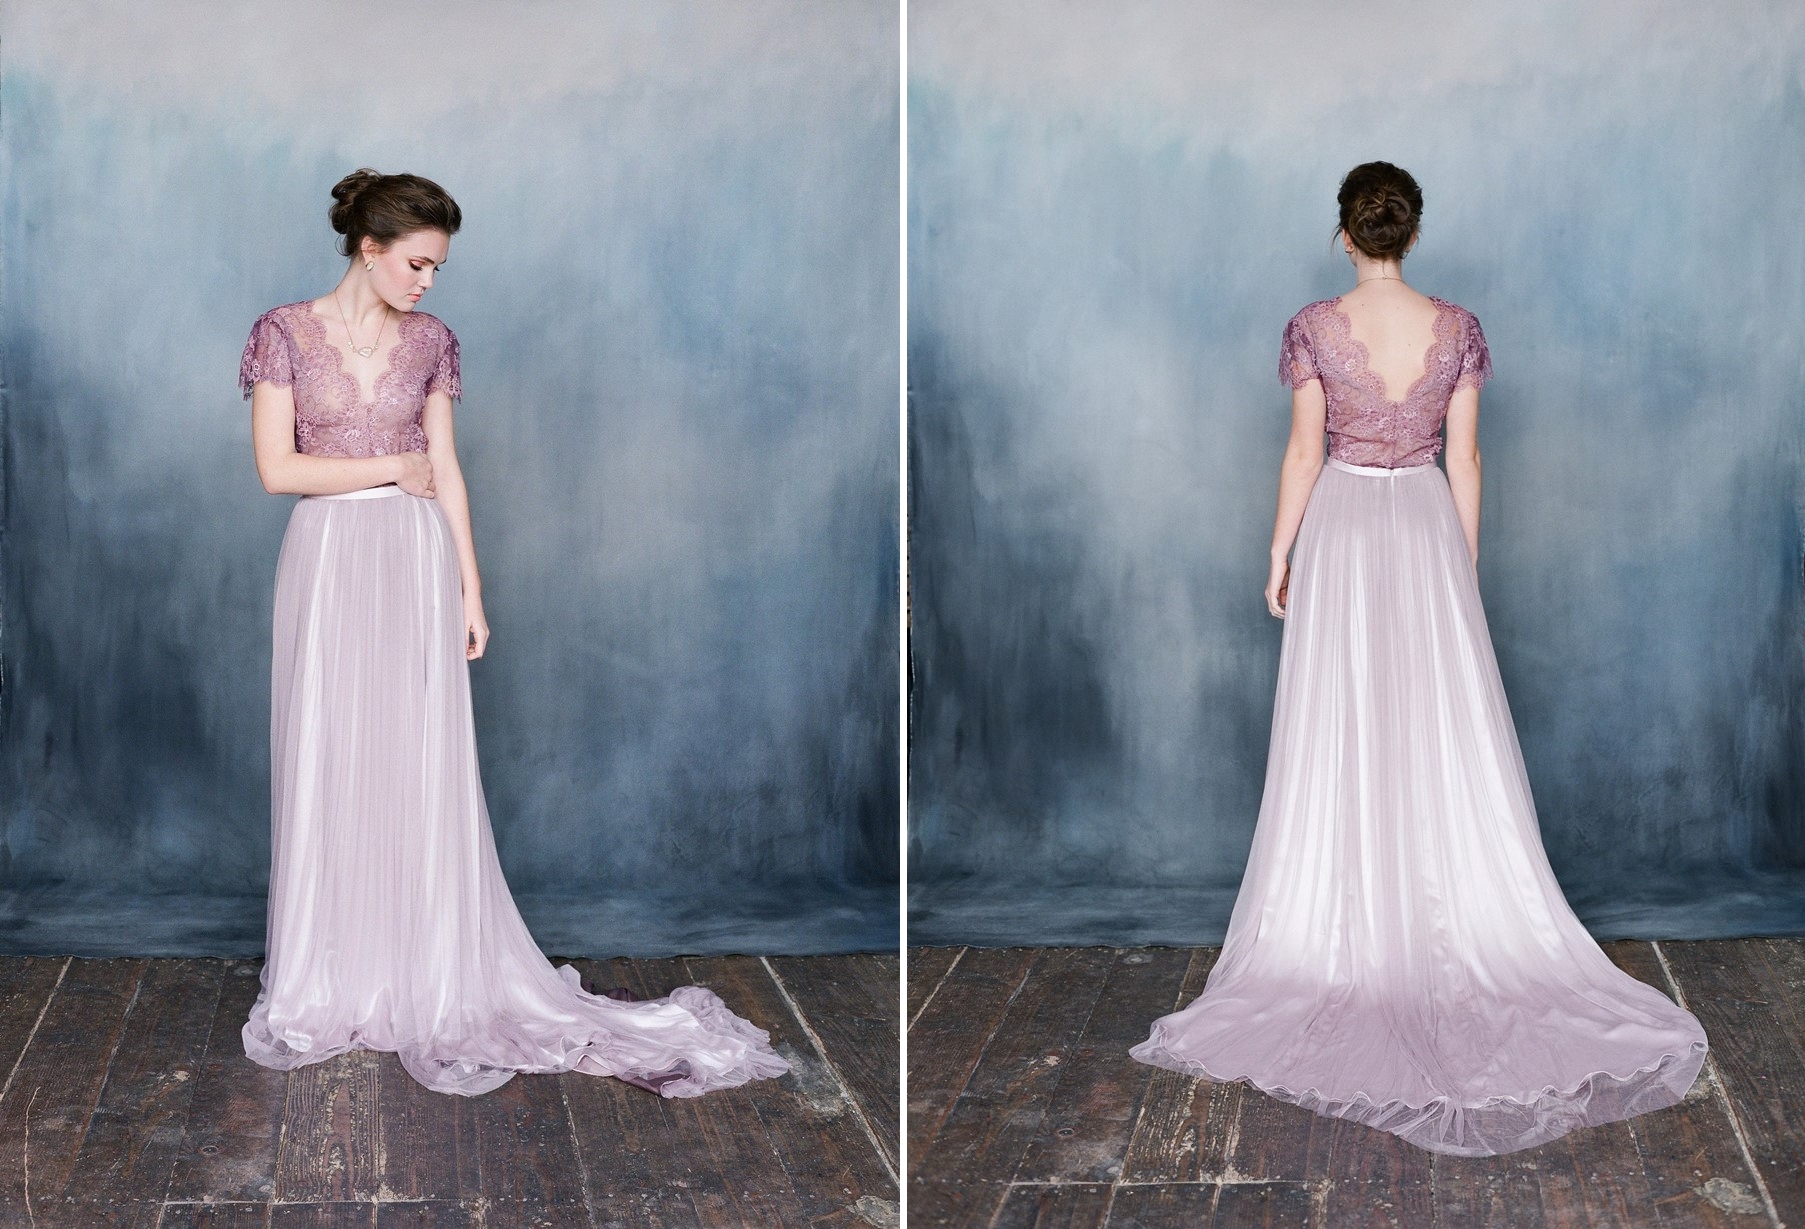 Ophelia - Beautiful Lilac Lace Wedding Dress from Emily Riggs